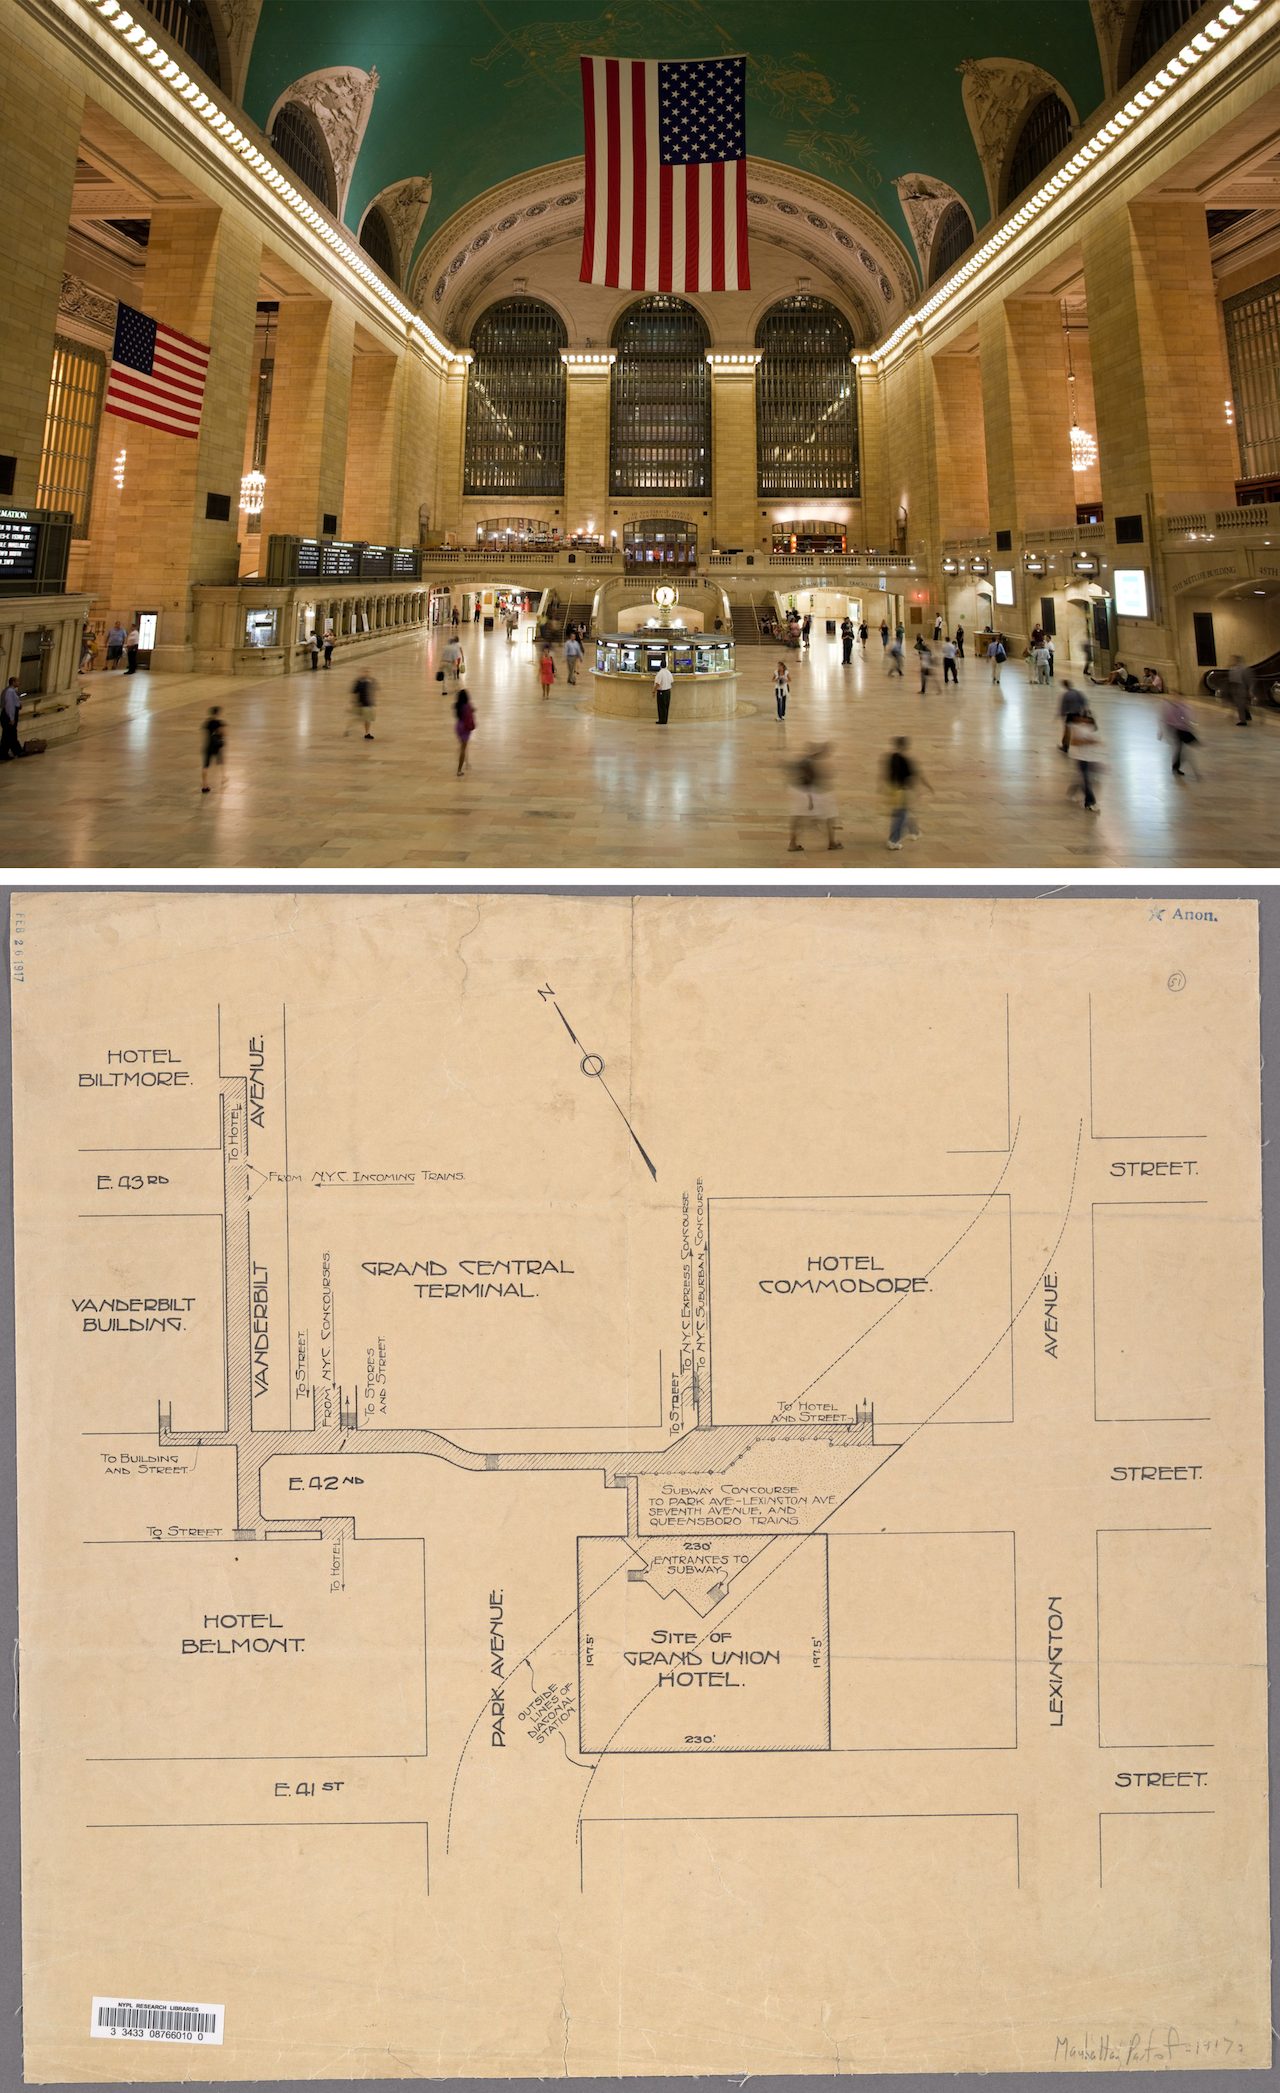 A collage featuring a photograph of a large train station hall, the Grand Central Terminal, and a map of its surrounding streets.